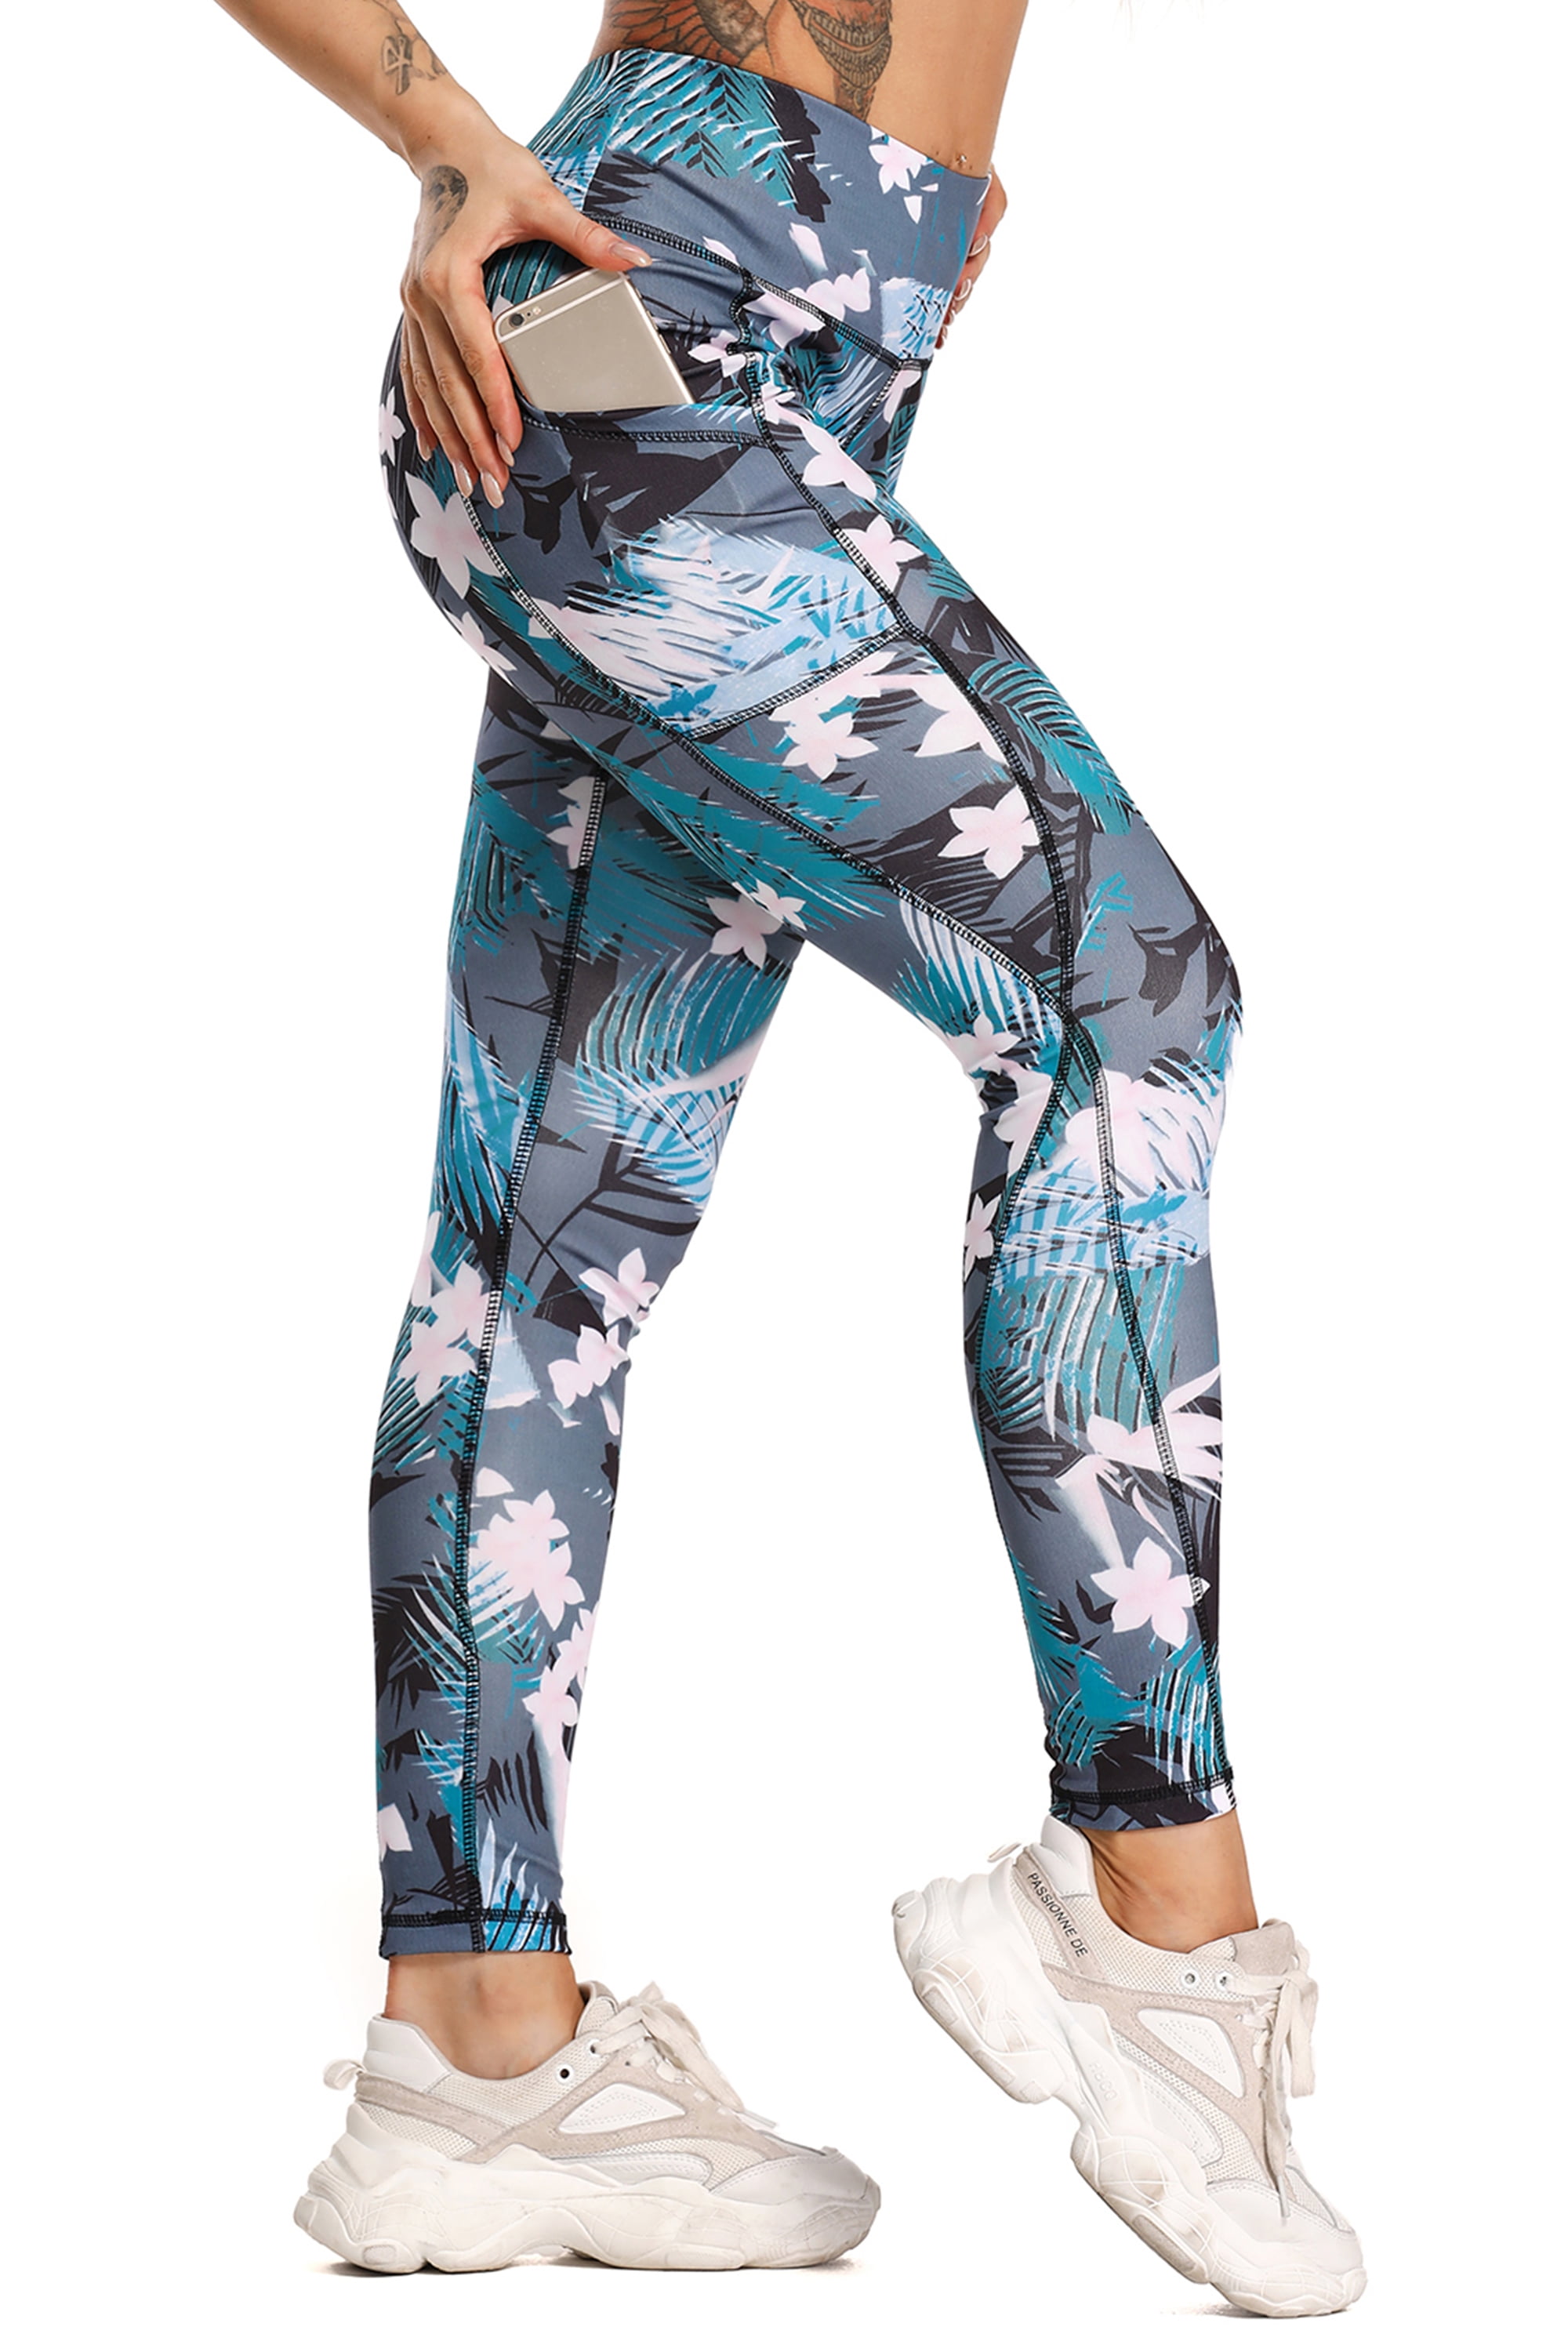 Womens Camouflage Floral Swatch with Watercolor Workout Running Leggings Tummy Control Sportswear Yoga Pants with Pockets